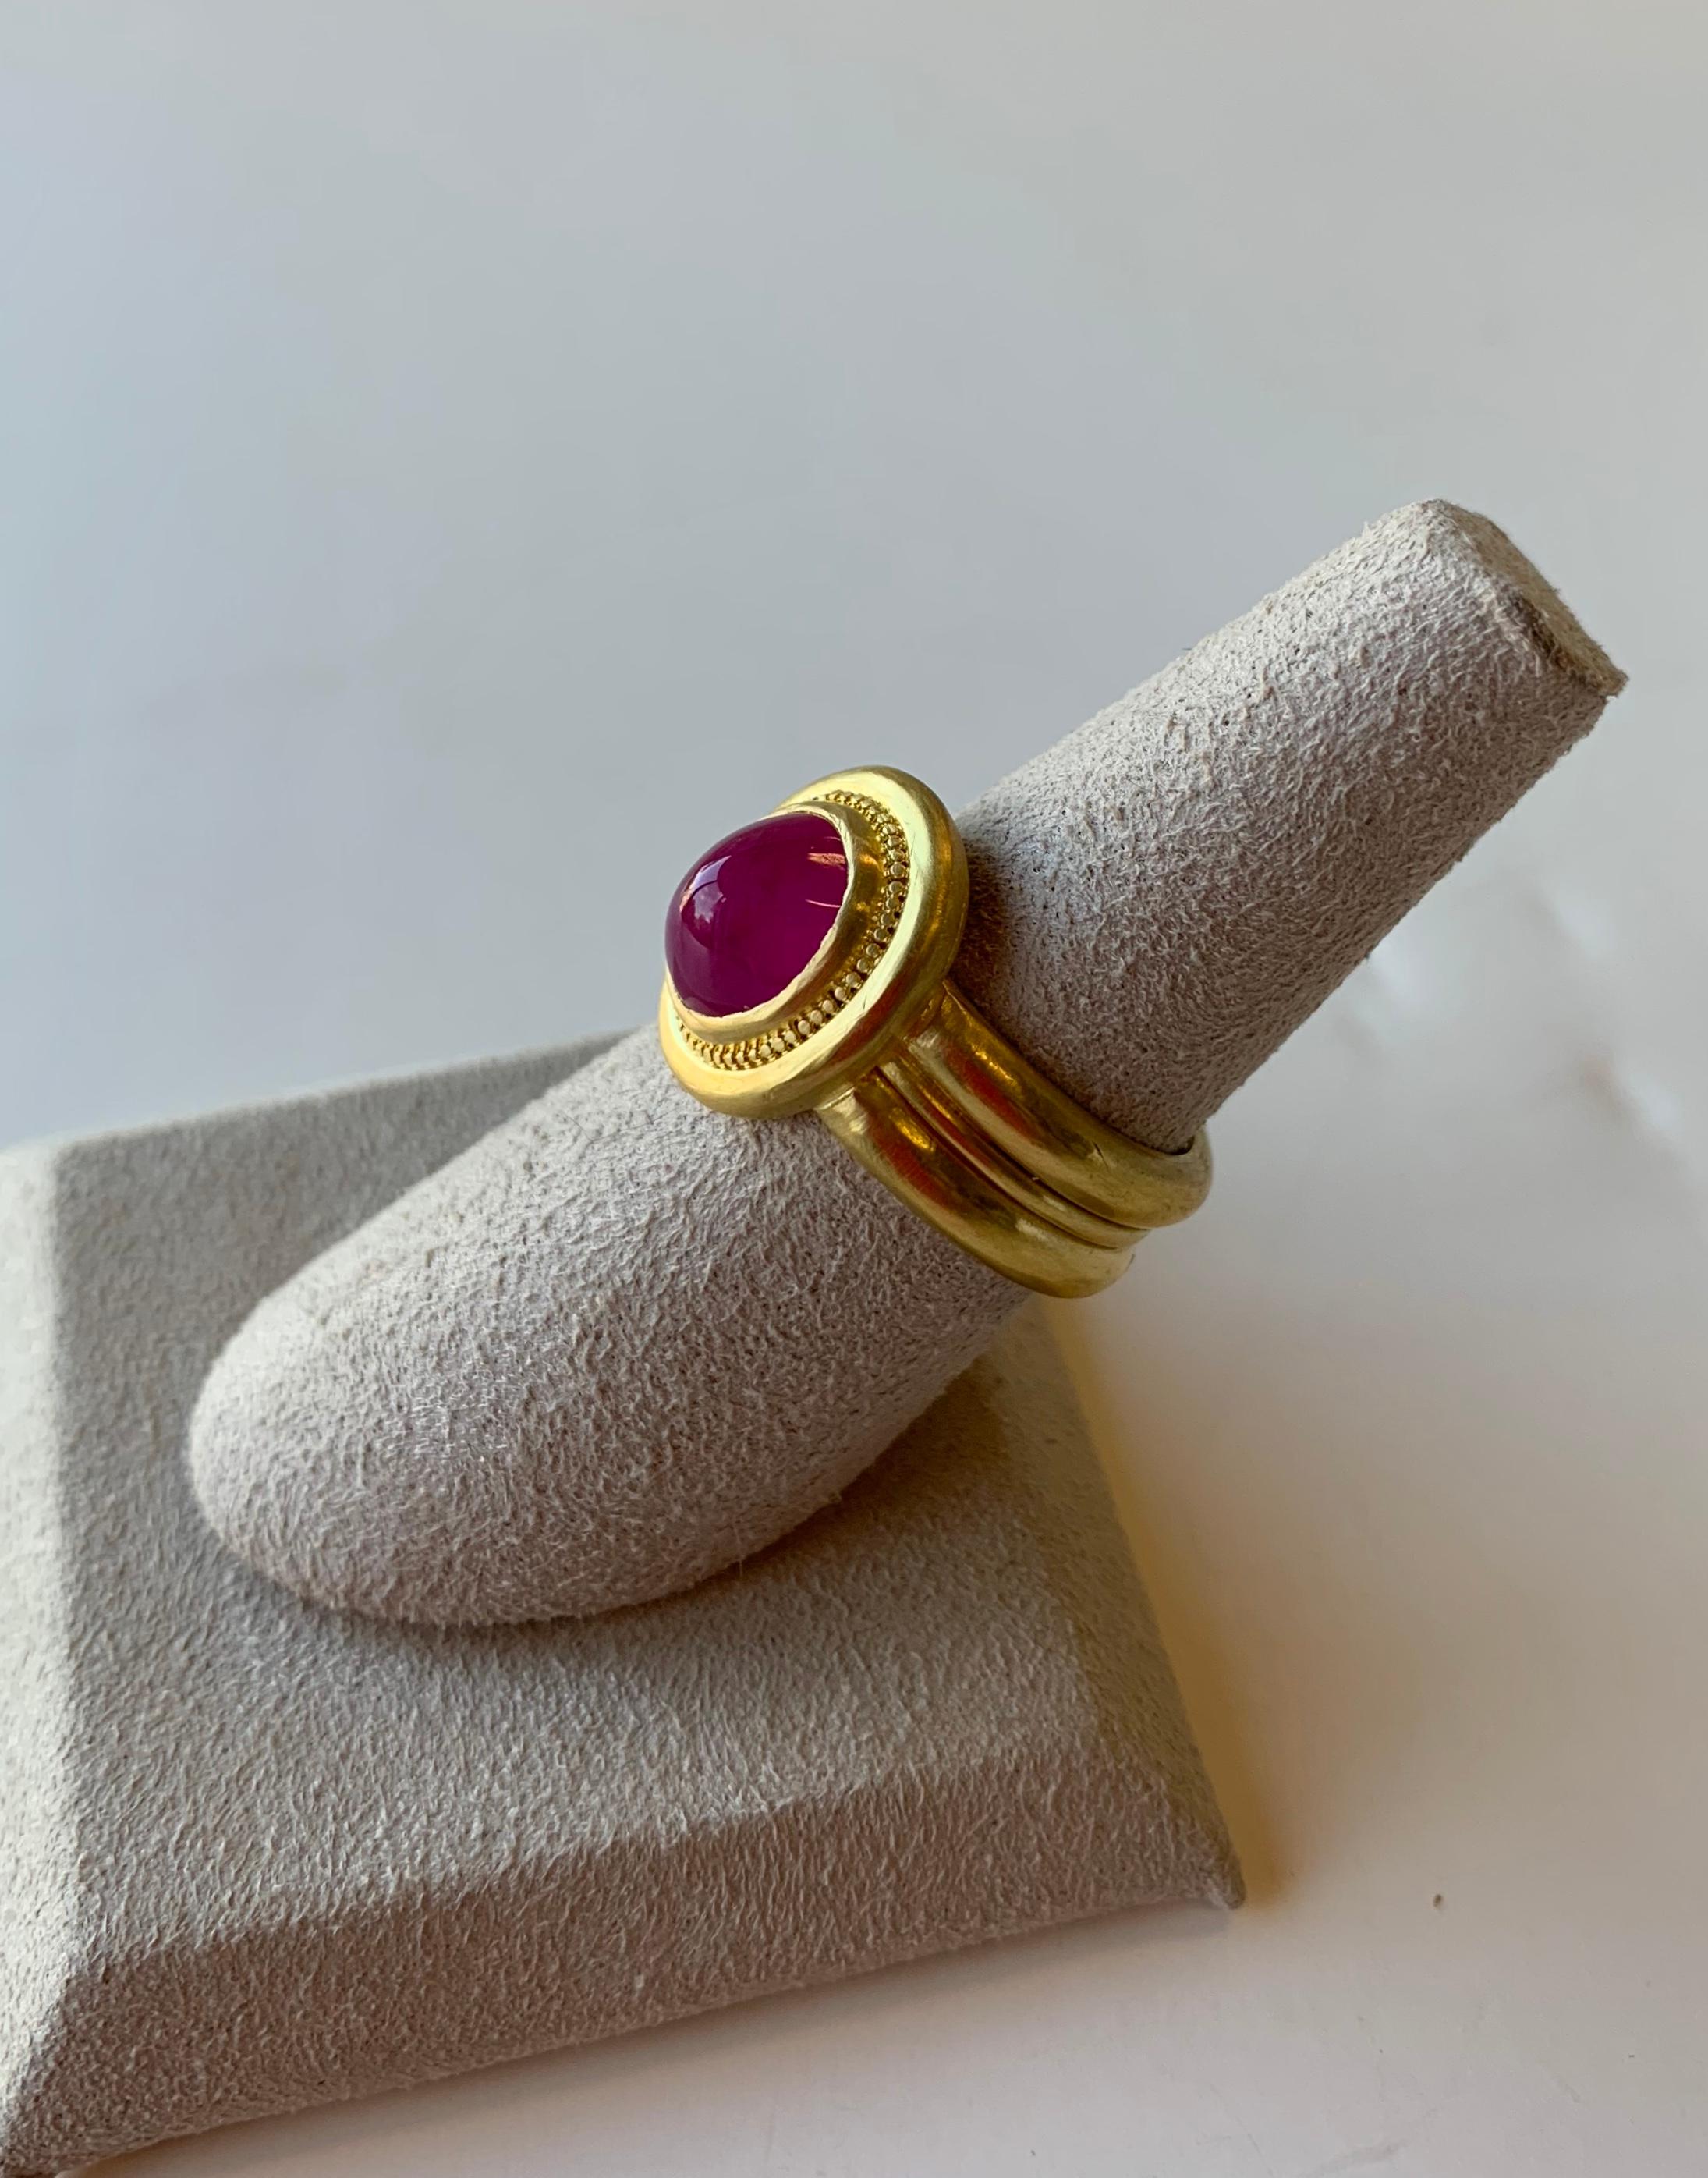 A stone that has been referenced since biblical times, rubies are considered one of the four cardinal gems. In ancient times, ruby stones were kept under a building foundation, to strengthen its structure. 
Sugarloaf cabochon ruby ring 22 karat gold